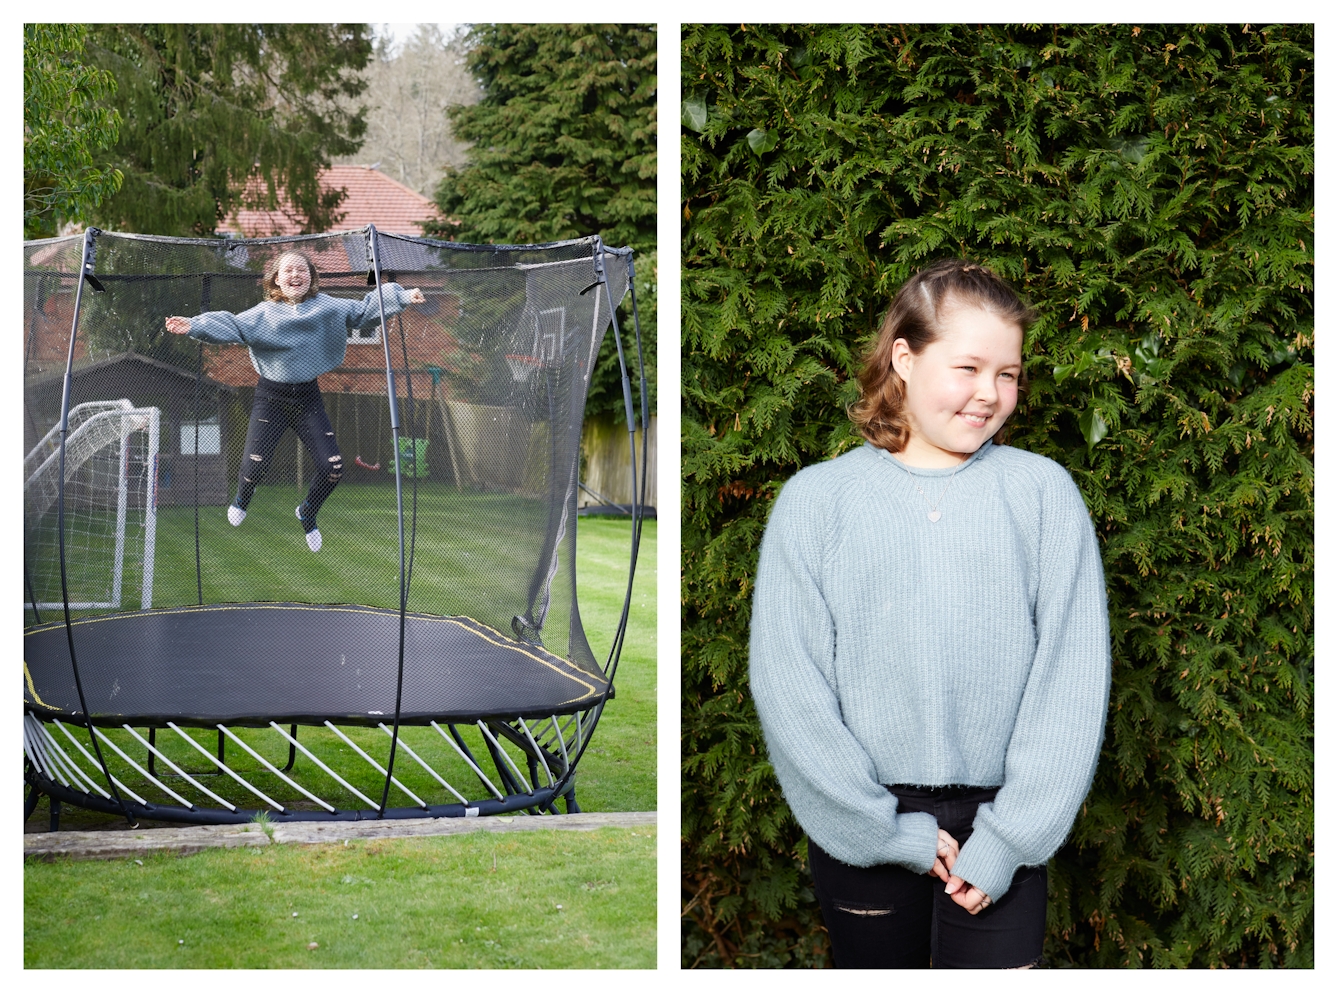 Photographic diptych. The image on the left shows a garden scene with a large trampoline surrounded by grass and trees. On the trampoline is a young girl who has been photographed mid jump, high in the air. She has a broad smile on her face. The image on the right shows the same young girl stood in front of the green foliage of a fir tree, from the waist up. She is smiling and look off to camera right, her fingertips loosely clasps together across the front of her body.